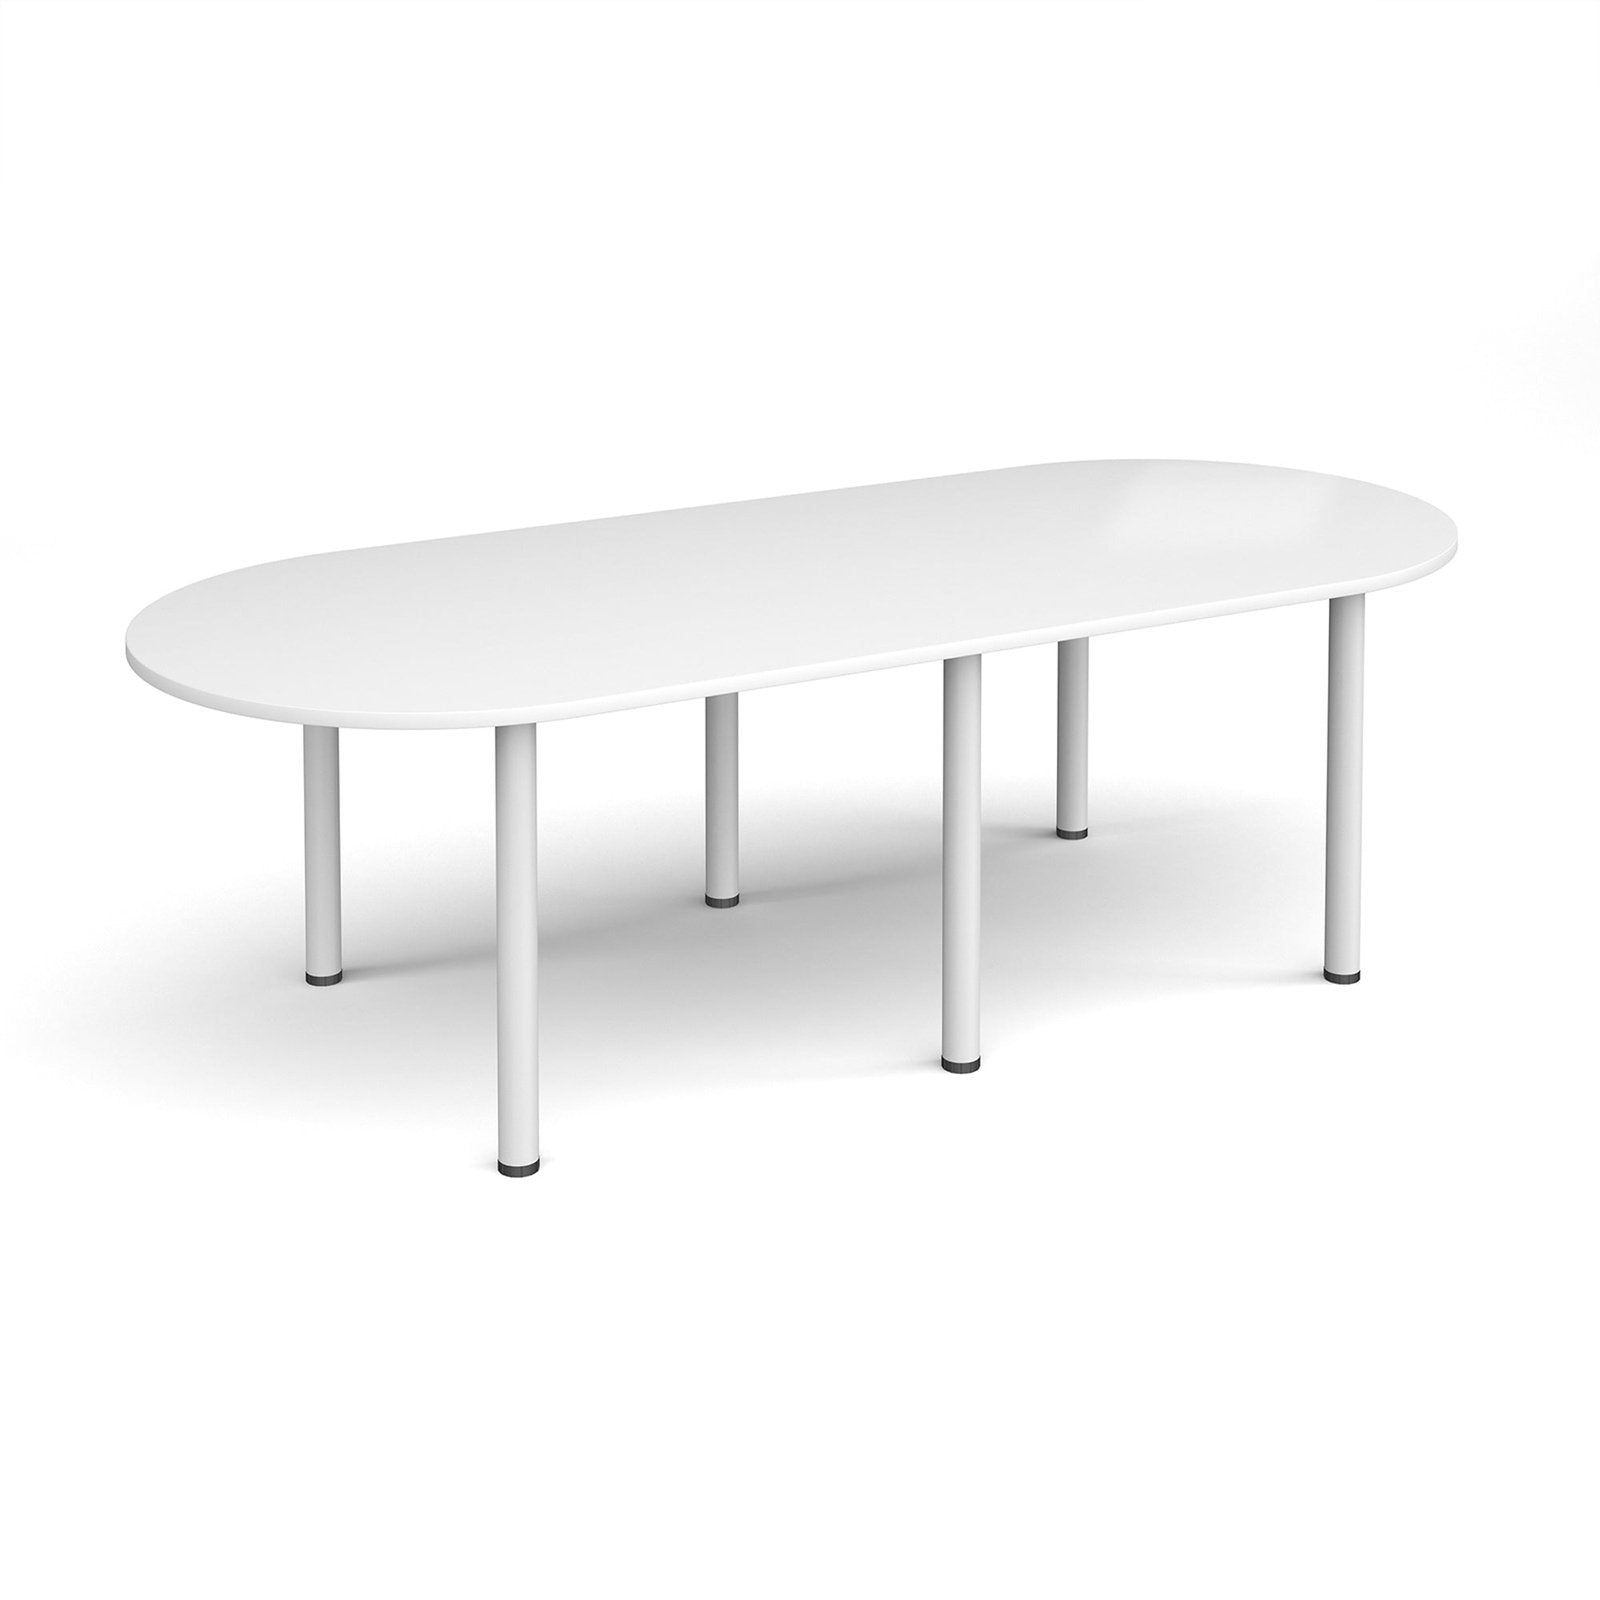 Radial end meeting table 2400mm x 1000mm - Office Products Online